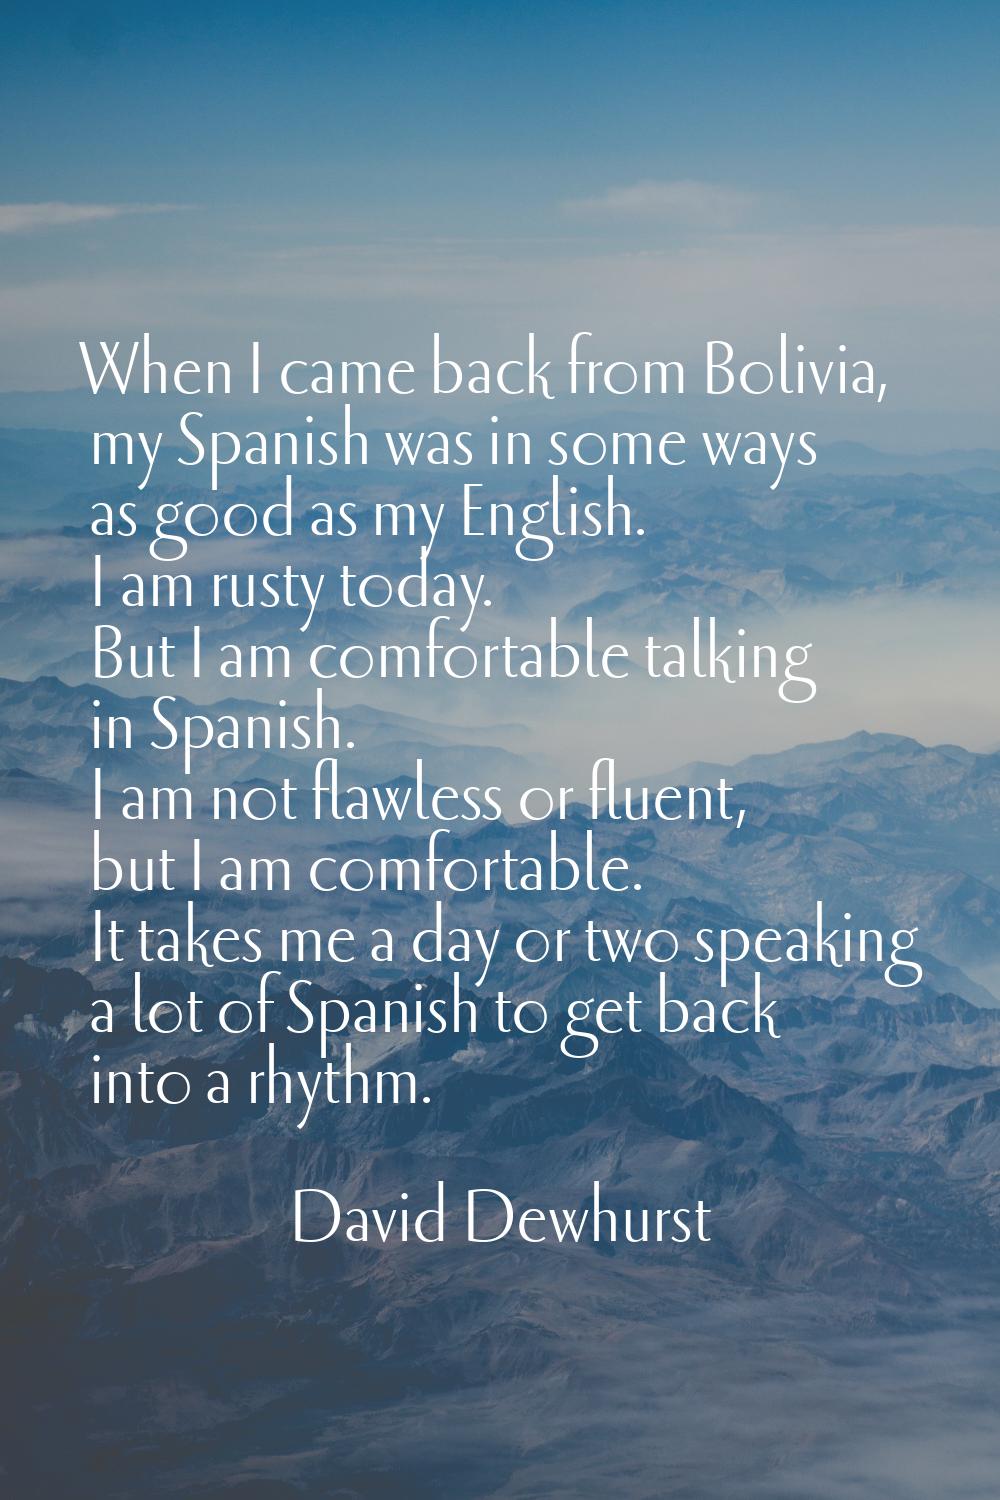 When I came back from Bolivia, my Spanish was in some ways as good as my English. I am rusty today.